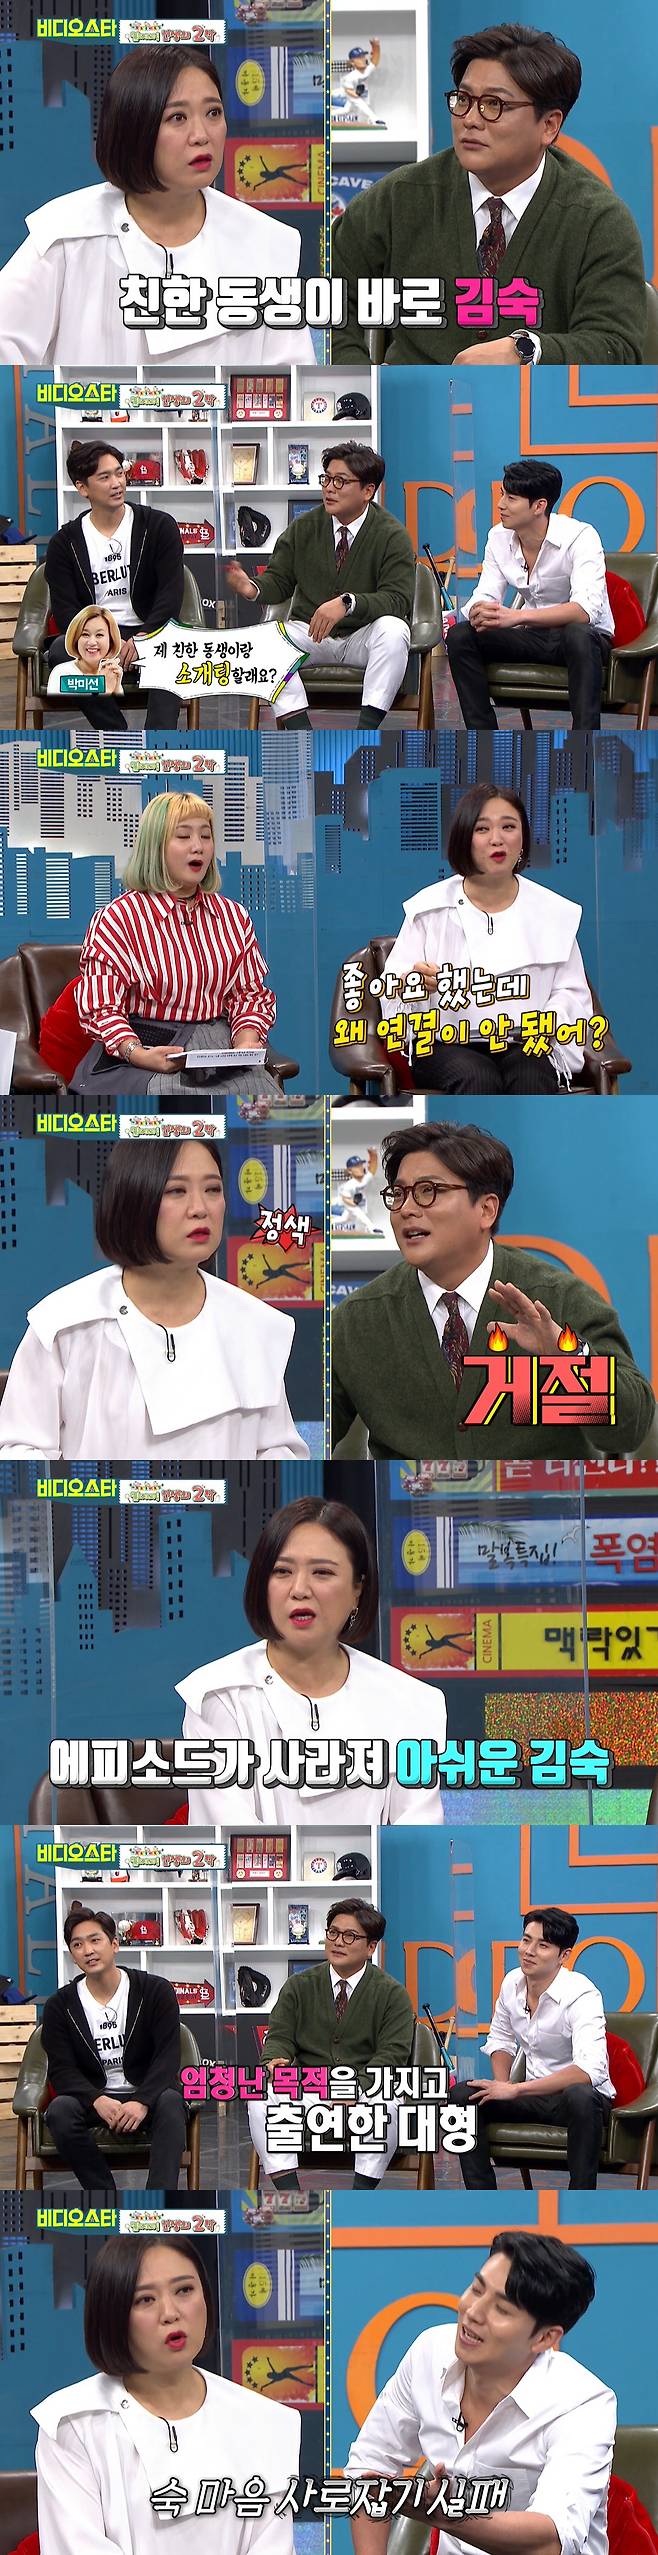 Video Star former Baseball player Kim Tae-kyun has revealed an anecdote that almost blind dated broadcaster Kim Sook.24 Days MBC Everlon Video Star broadcast The late entertainer special, throw!The second act of life special feature featured former Baseball player Bong Jung-geun, Shim Soo-chang, Kim Tae-kyun and Lee Dae-hyung.Kim Sook said to Kim Tae-kyun, I was sorry for the appearance of the show because it was no jam.Kim Tae-kyun said, I dont really have a talent, I have nothing to say about interviewing the writer.MC Park Soo-hyun responded by saying, Its already no jam and laughed.But Kim Tae-kyun soon caught the attention of saying that he was first to reveal something in Video Star. It was an anecdote that almost blind dated Kim Sook.Kim Tae-kyun said, Park Mi-sun, who met in a program called My Best Note, asked me, Do you want to introduce me with my close sister?Kim Sook asked, Why did not you connect? Kim Tae-kyun said, I did not say I was good. I was surprised to tell my sister.Kim Sook said, Come along. Then Kim Tae-kyun asked her age, and Kim Sook was surprised by the age of seven.Lee Dae-hyung, who was listening to it from the side, said, I came out to capture Kim Sooks heart.I have an ambition to have all my property. Lee Seung-gis sister is my woman .However, Kim Sook listened to the song and laughed, responding that it is difficult to give all property.